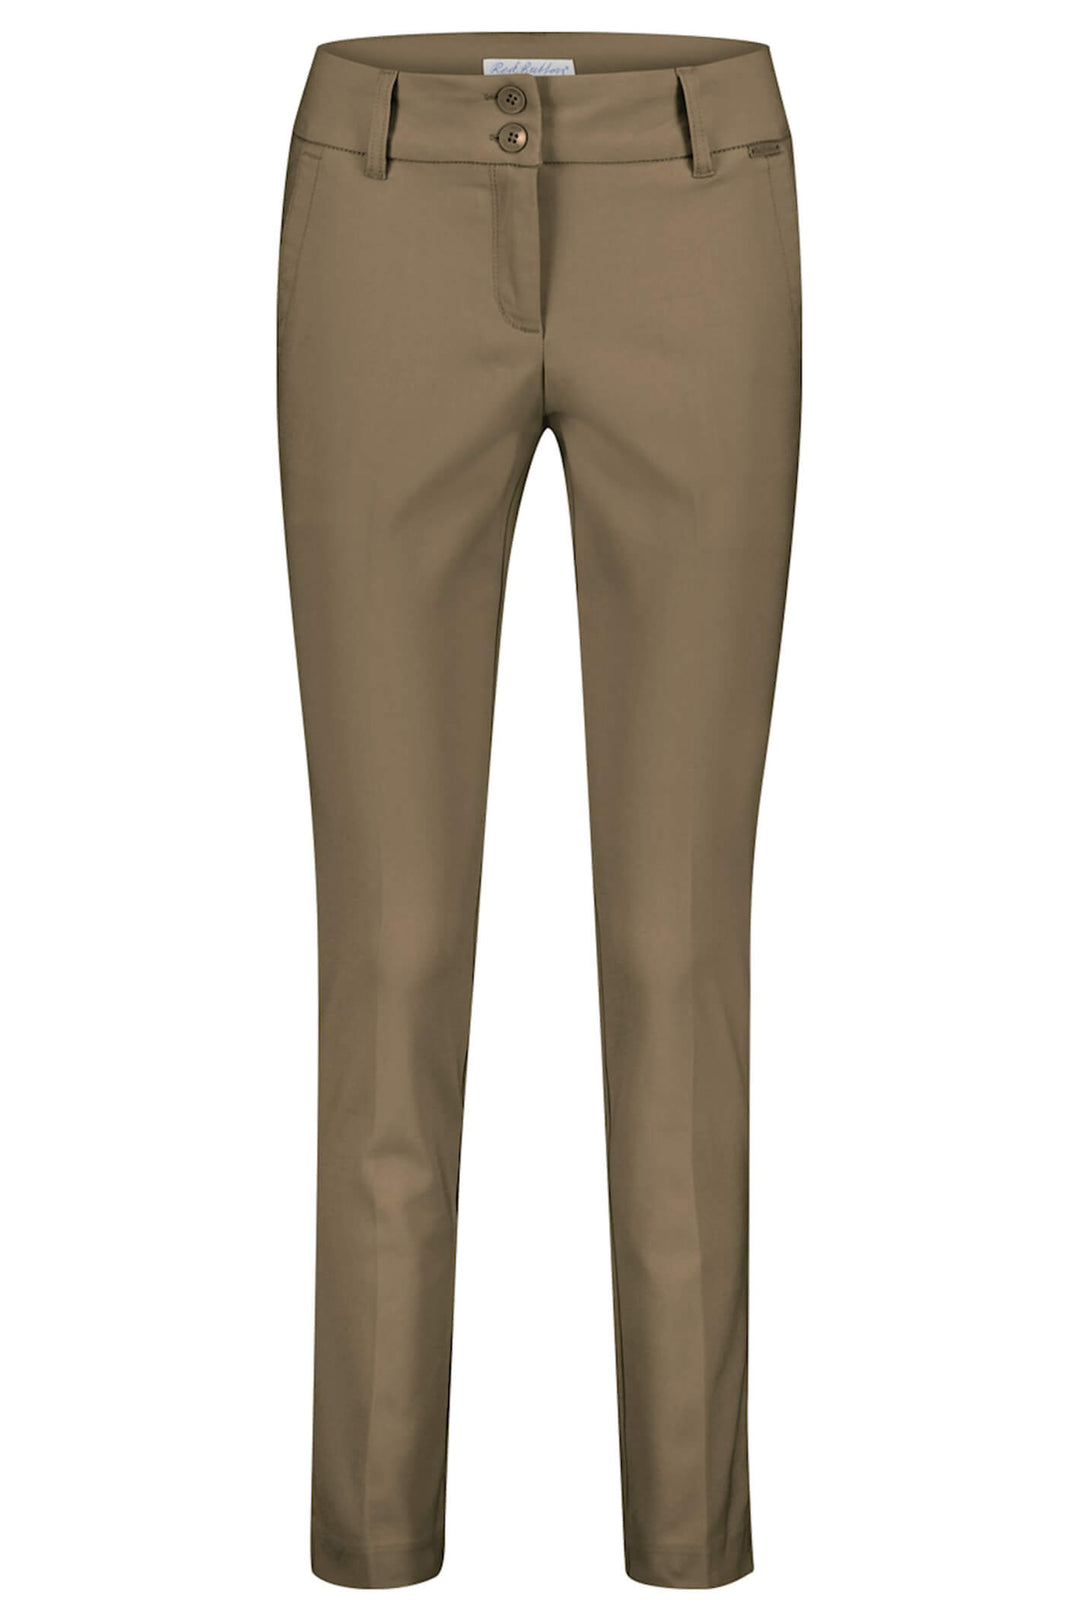 Red Button SRB4122 Diana Dark Taupe Smart Trouser - Dotique